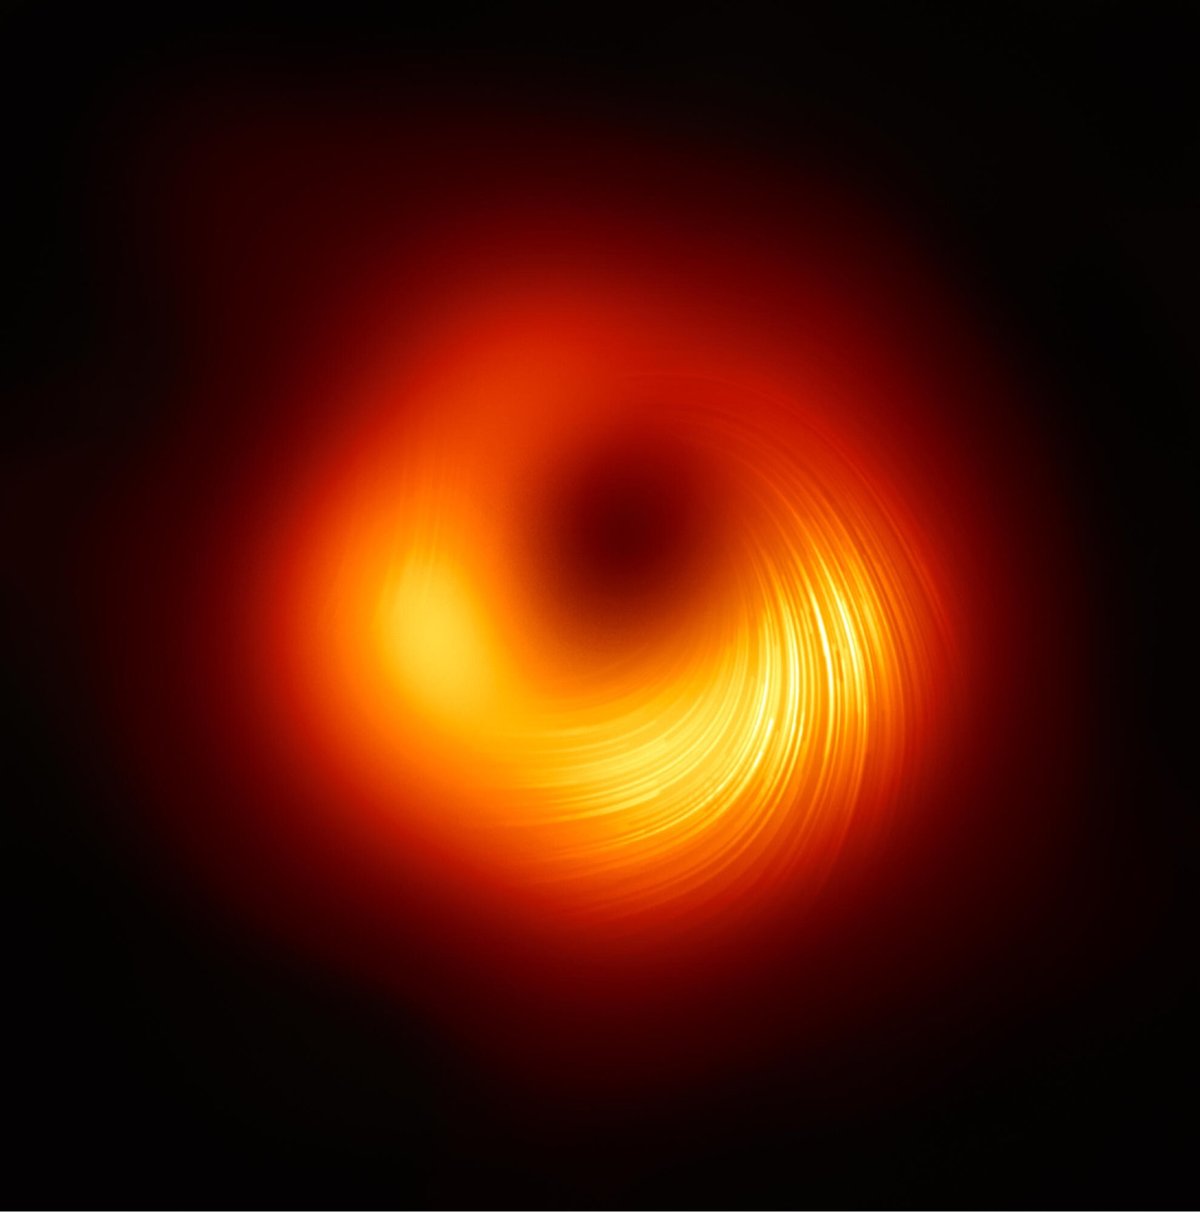 swirling image of the black hole at the center of the M87 galaxy